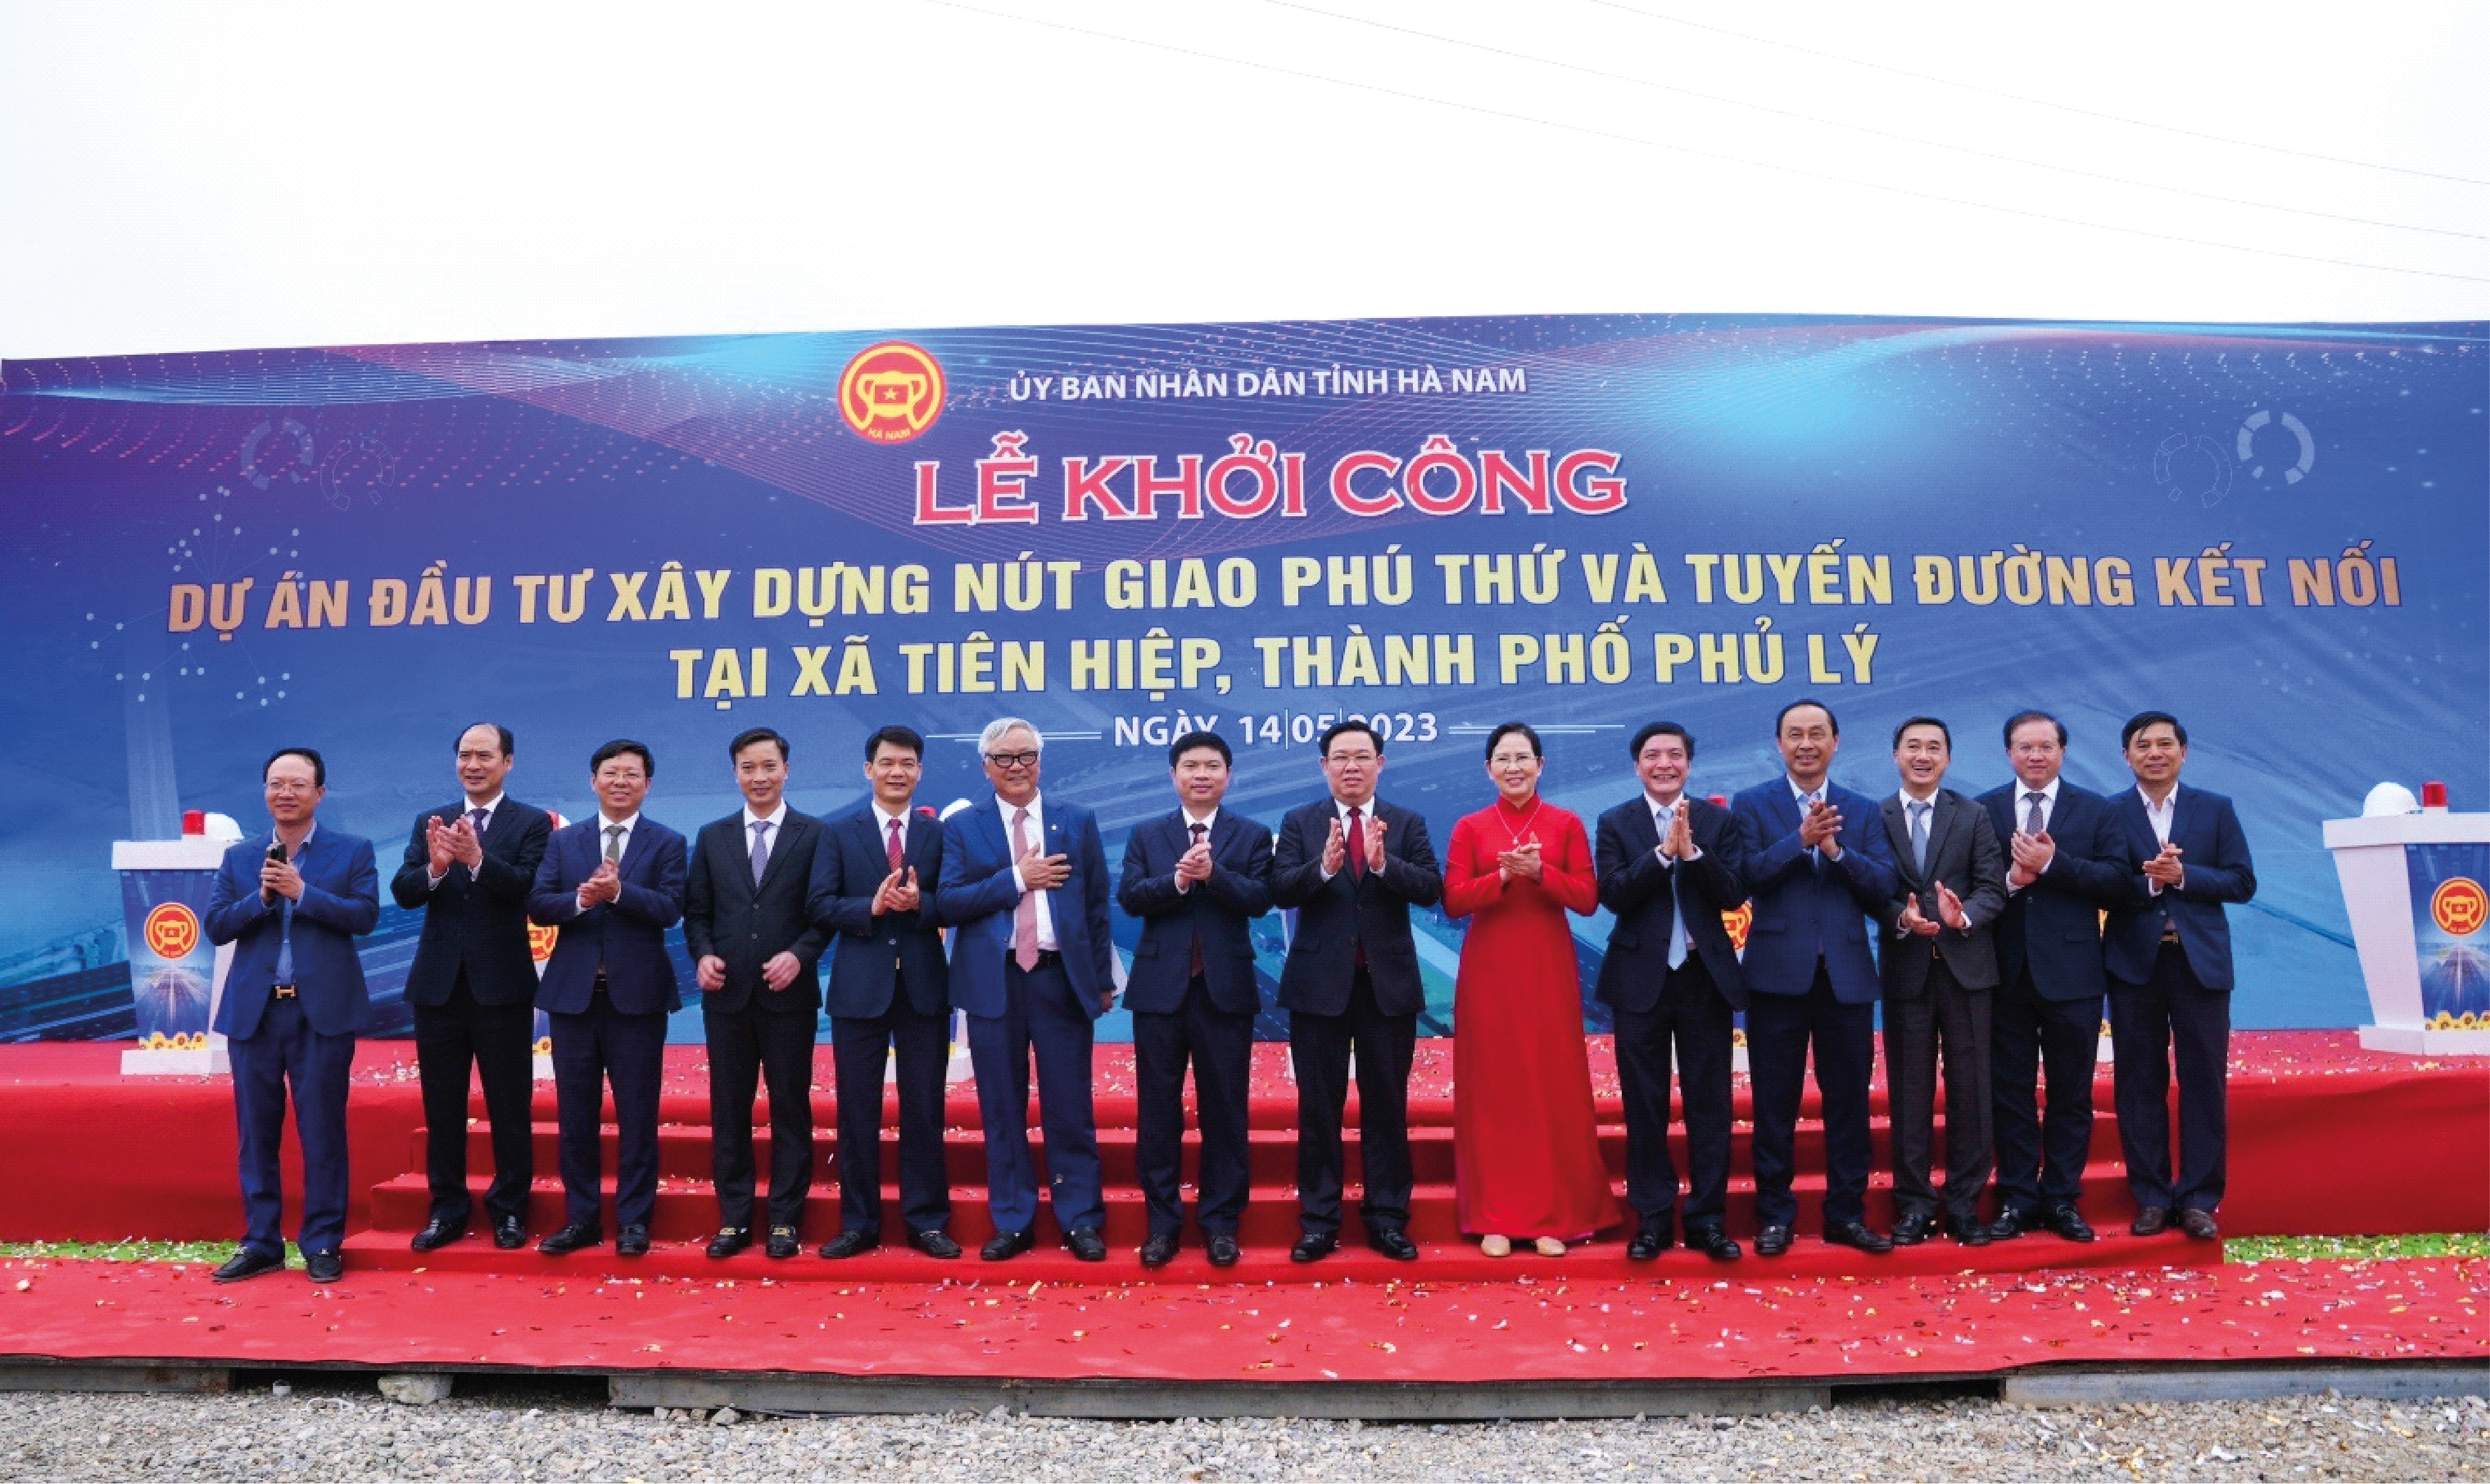 GROUNDBREAKING CEREMONY OF PHU THU INTERSECTION AND LINKING ROAD CONSTRUCTION PROJECT IN TIEN HIEP COMMUNE, PHU LY CITY